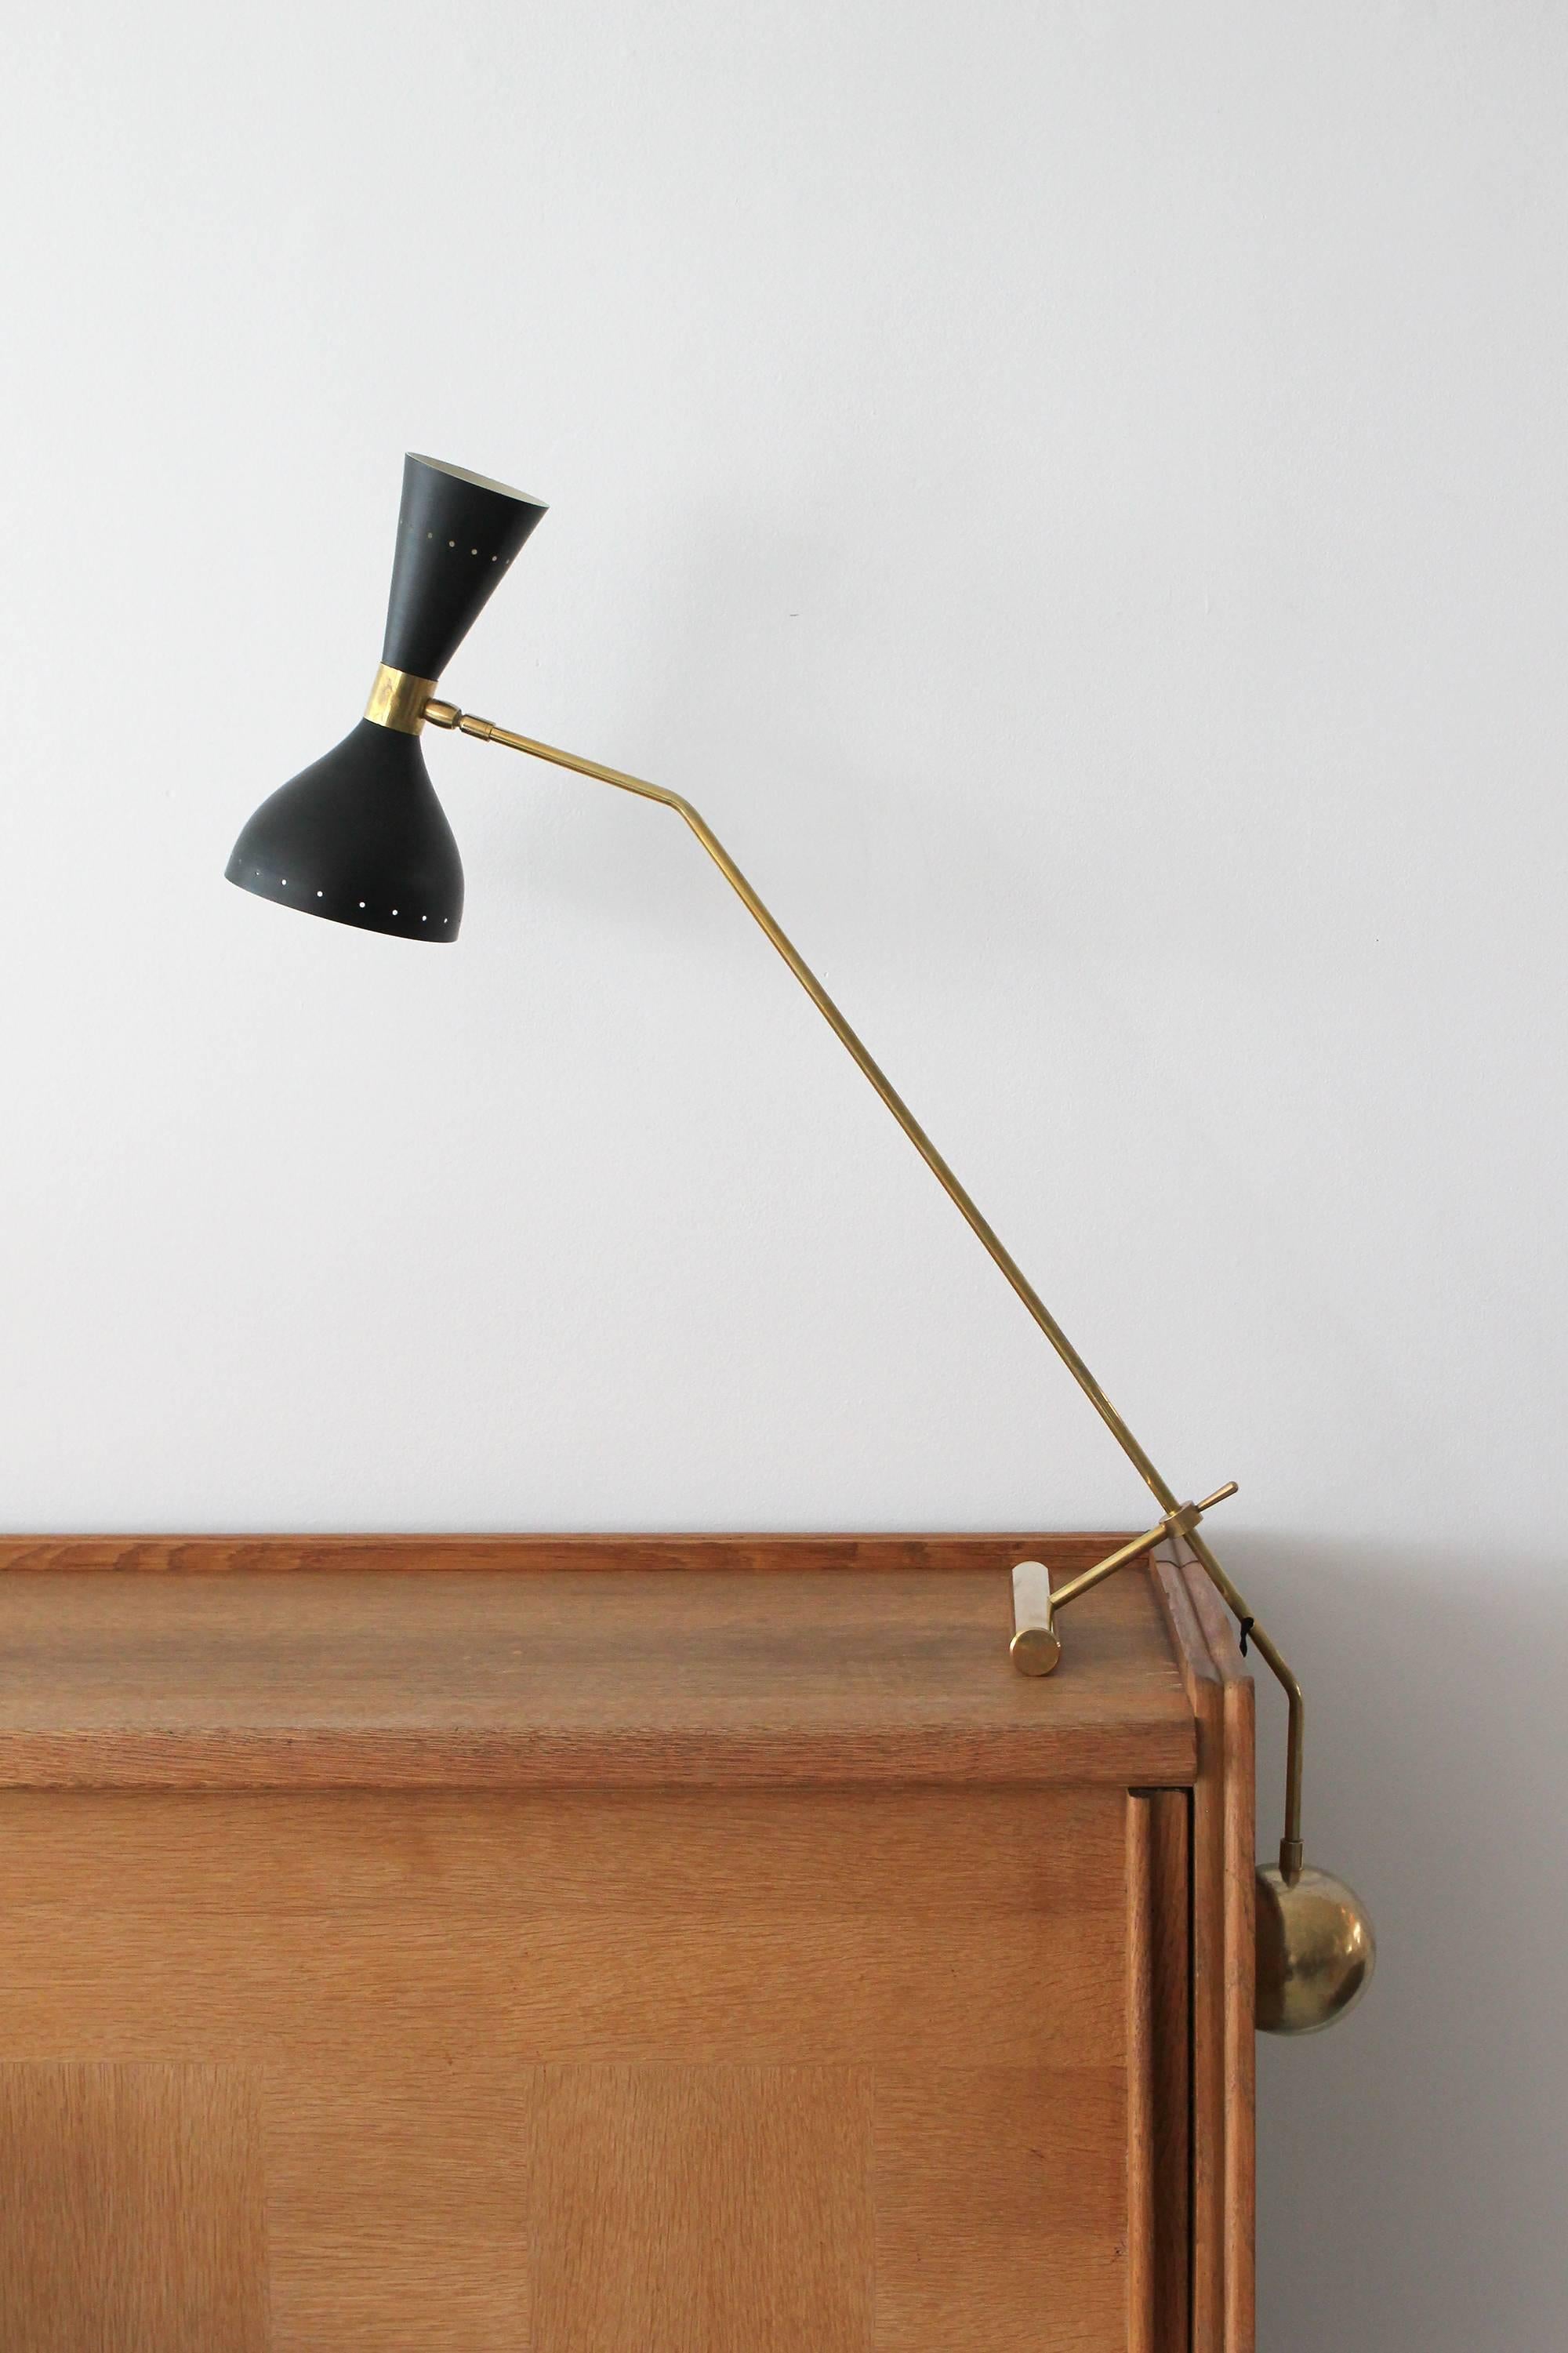 Italian brass desk lamp with heavy brass counterbalance weight and pivoting black cone shade that lights up and down. Newly produced in Italy and wired to American standards. Also available in a yellow and white shade.